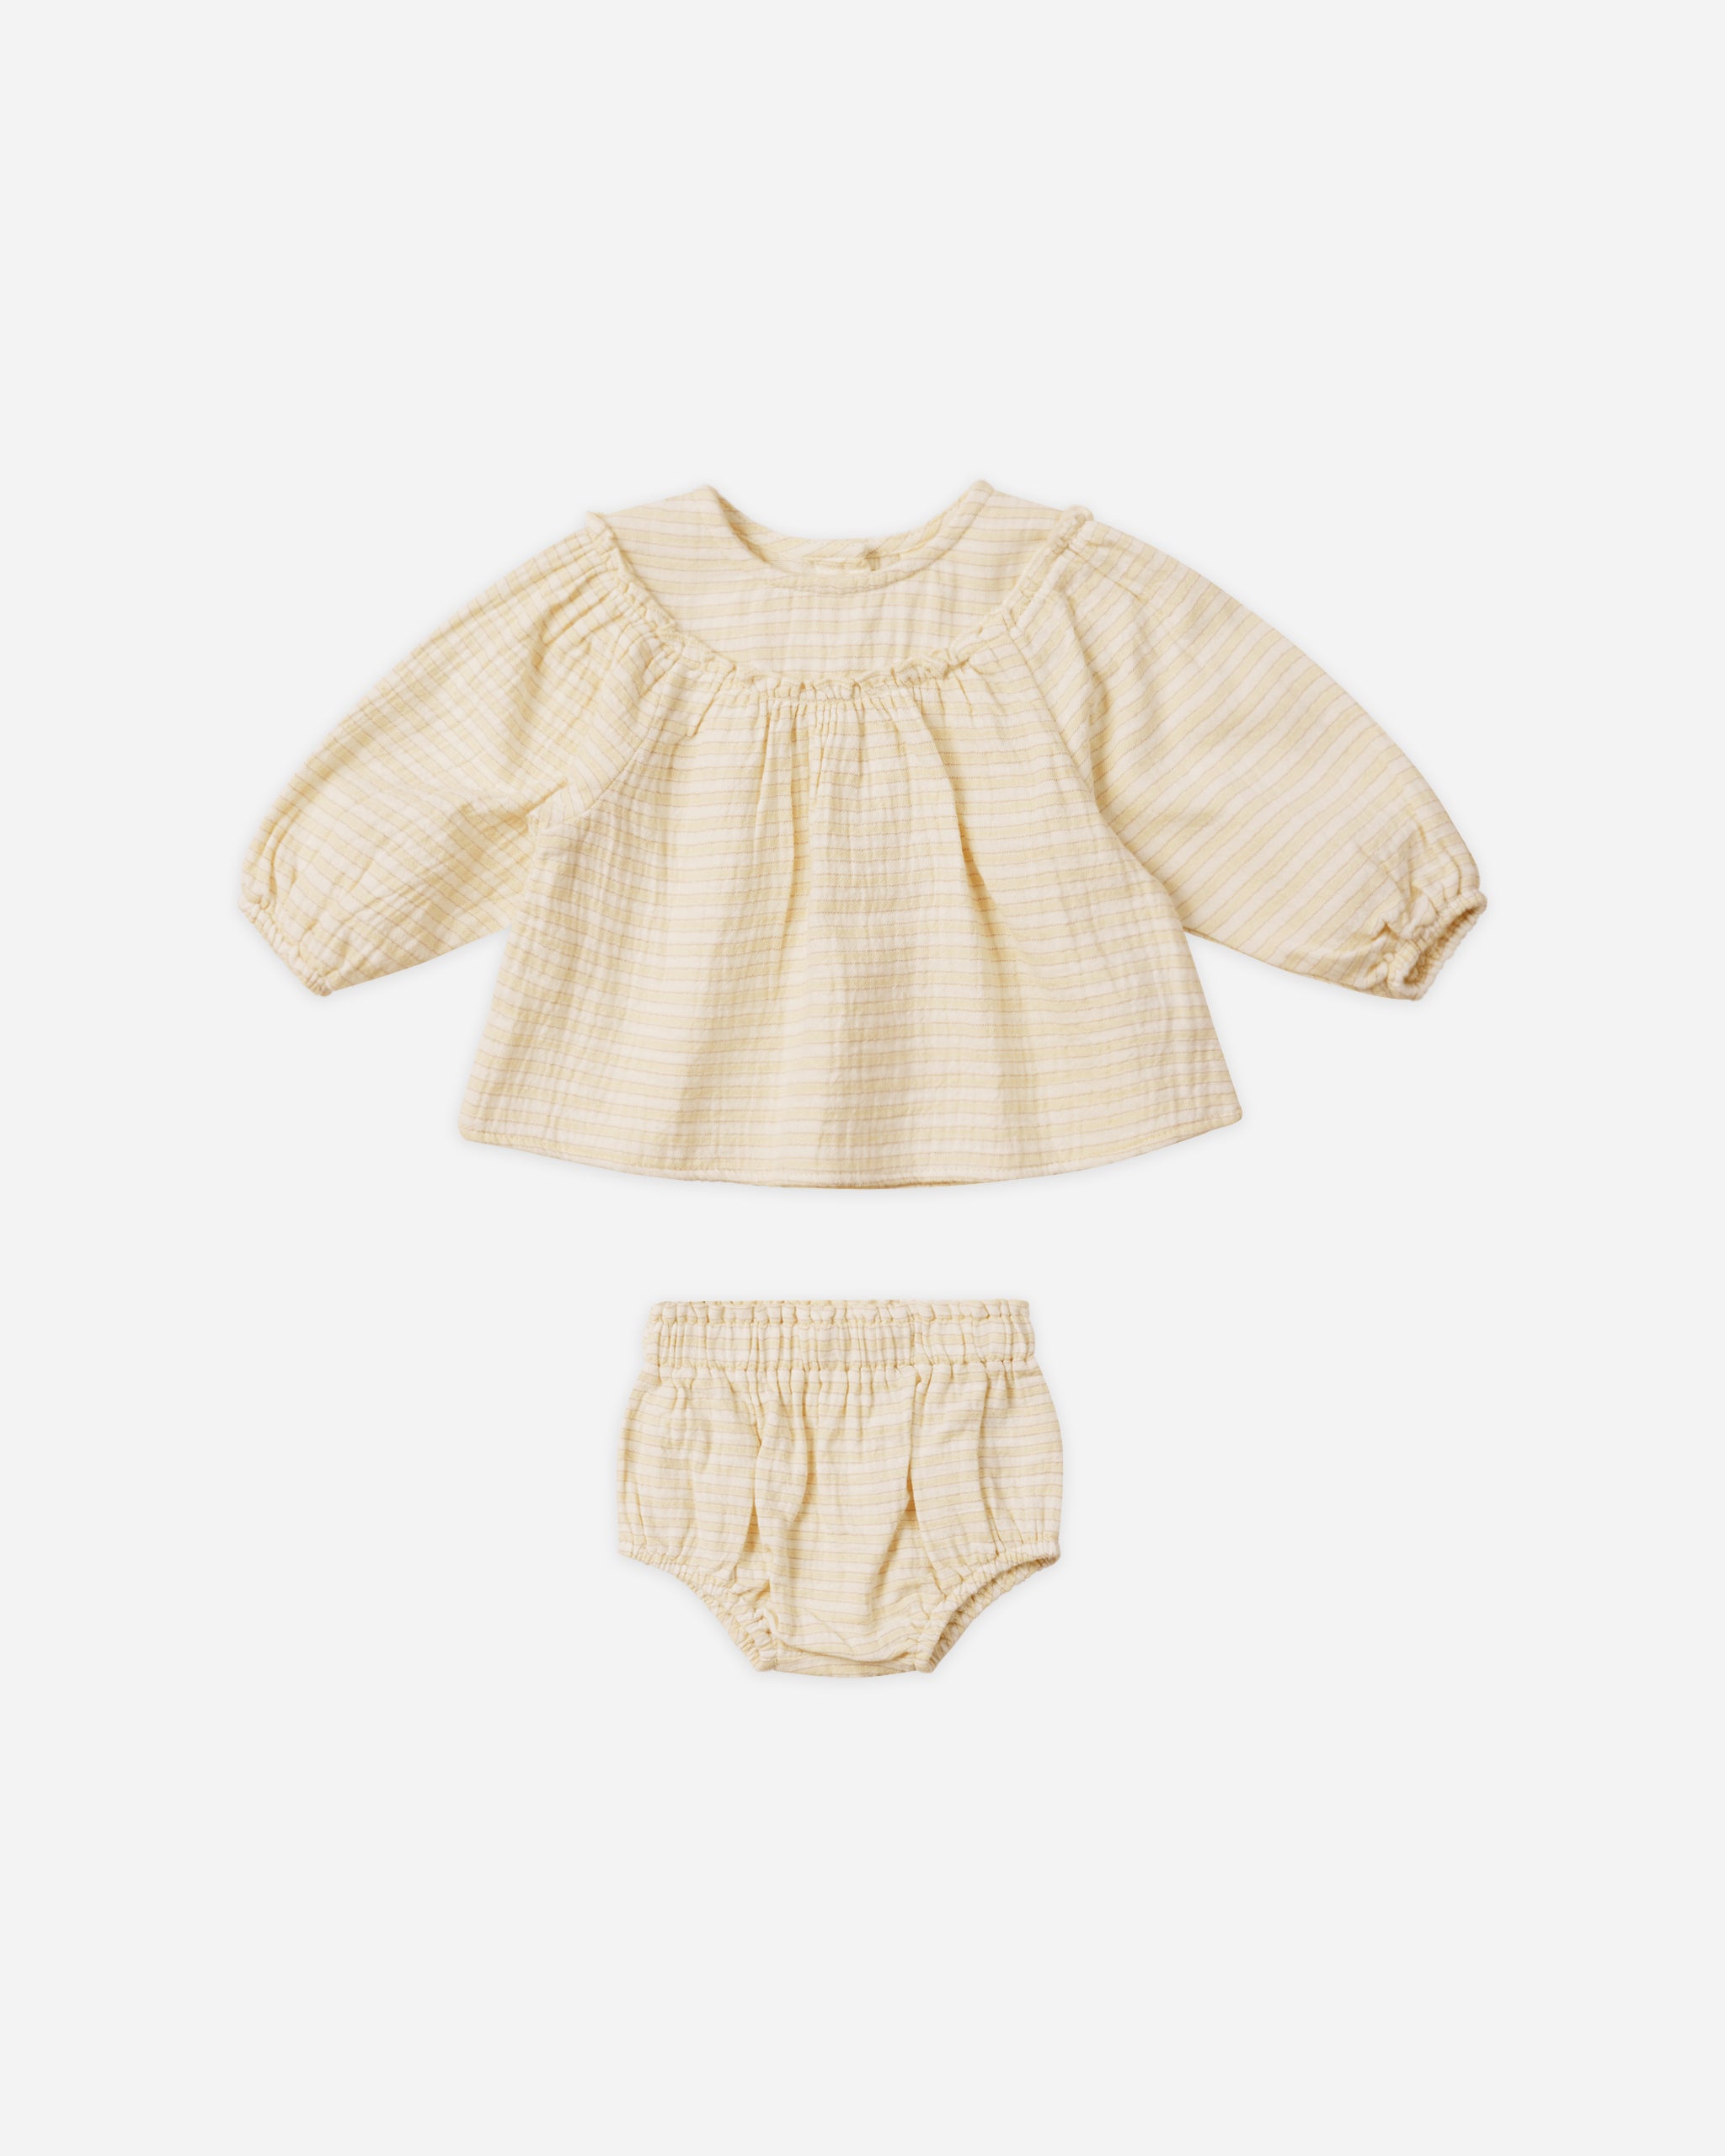 Mia Top + Bloomer Set || Lemon Stripe - Rylee + Cru | Kids Clothes | Trendy Baby Clothes | Modern Infant Outfits |